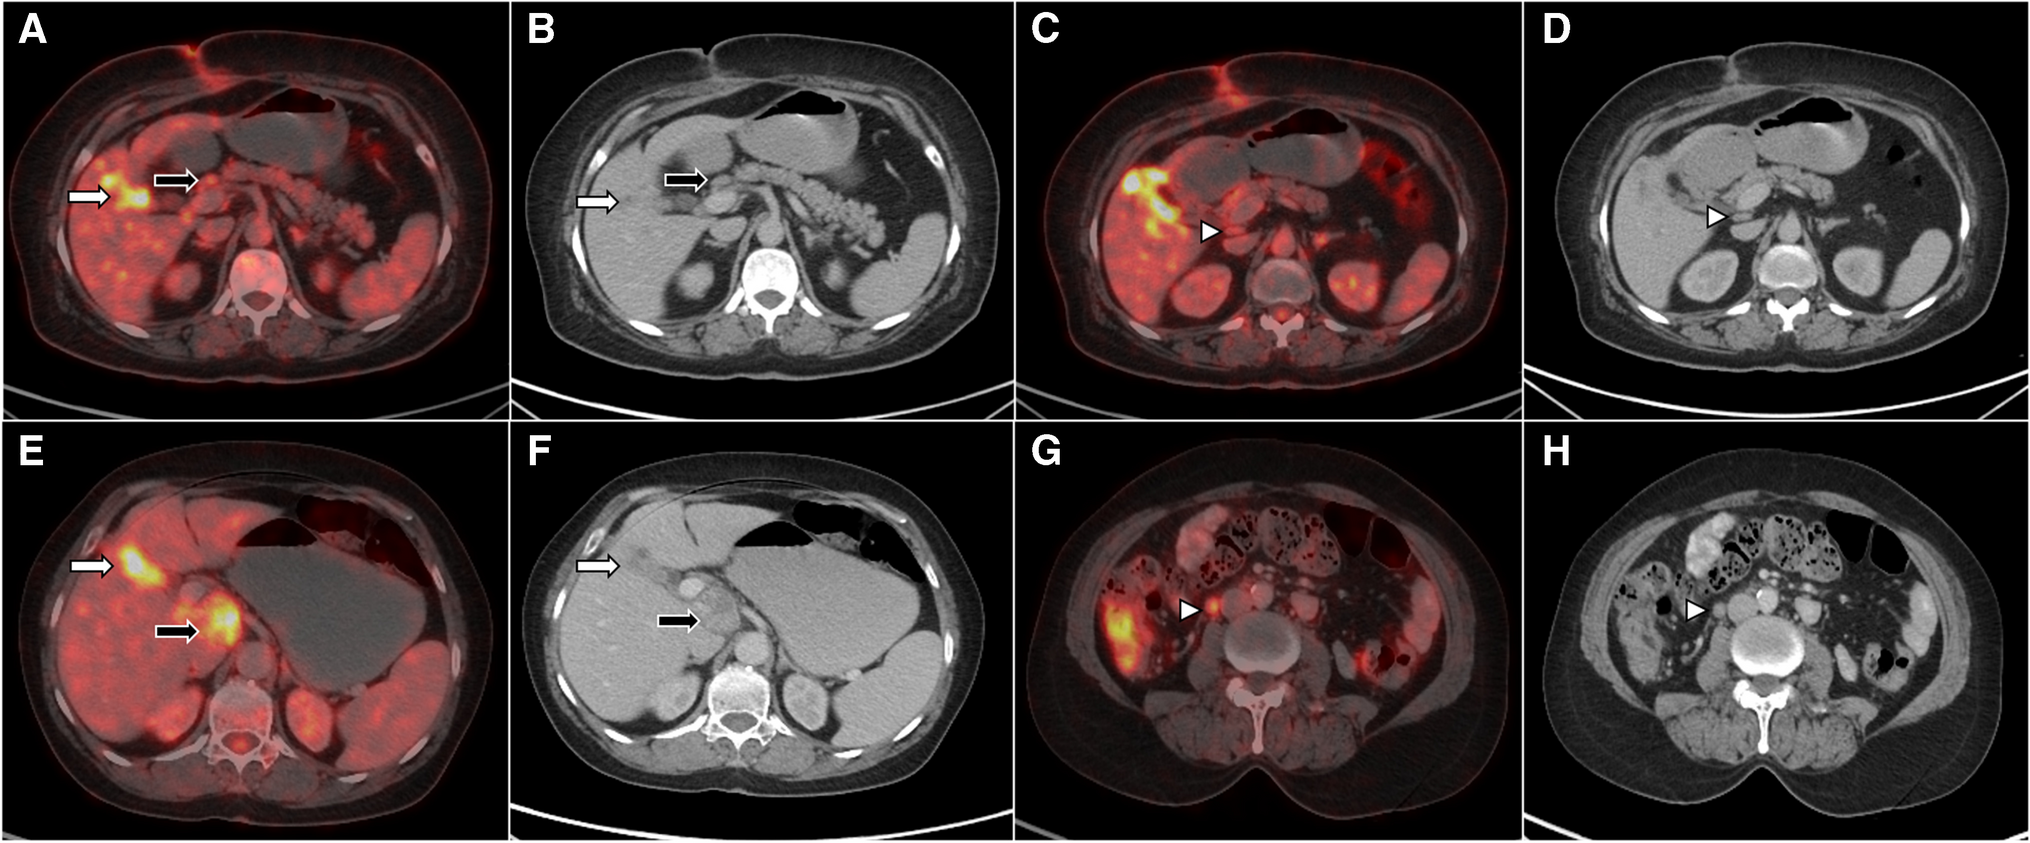 Incidentally Detected Gallbladder Carcinoma: Can F-18 FDG PET/CT Aid in Staging and Prognostication?